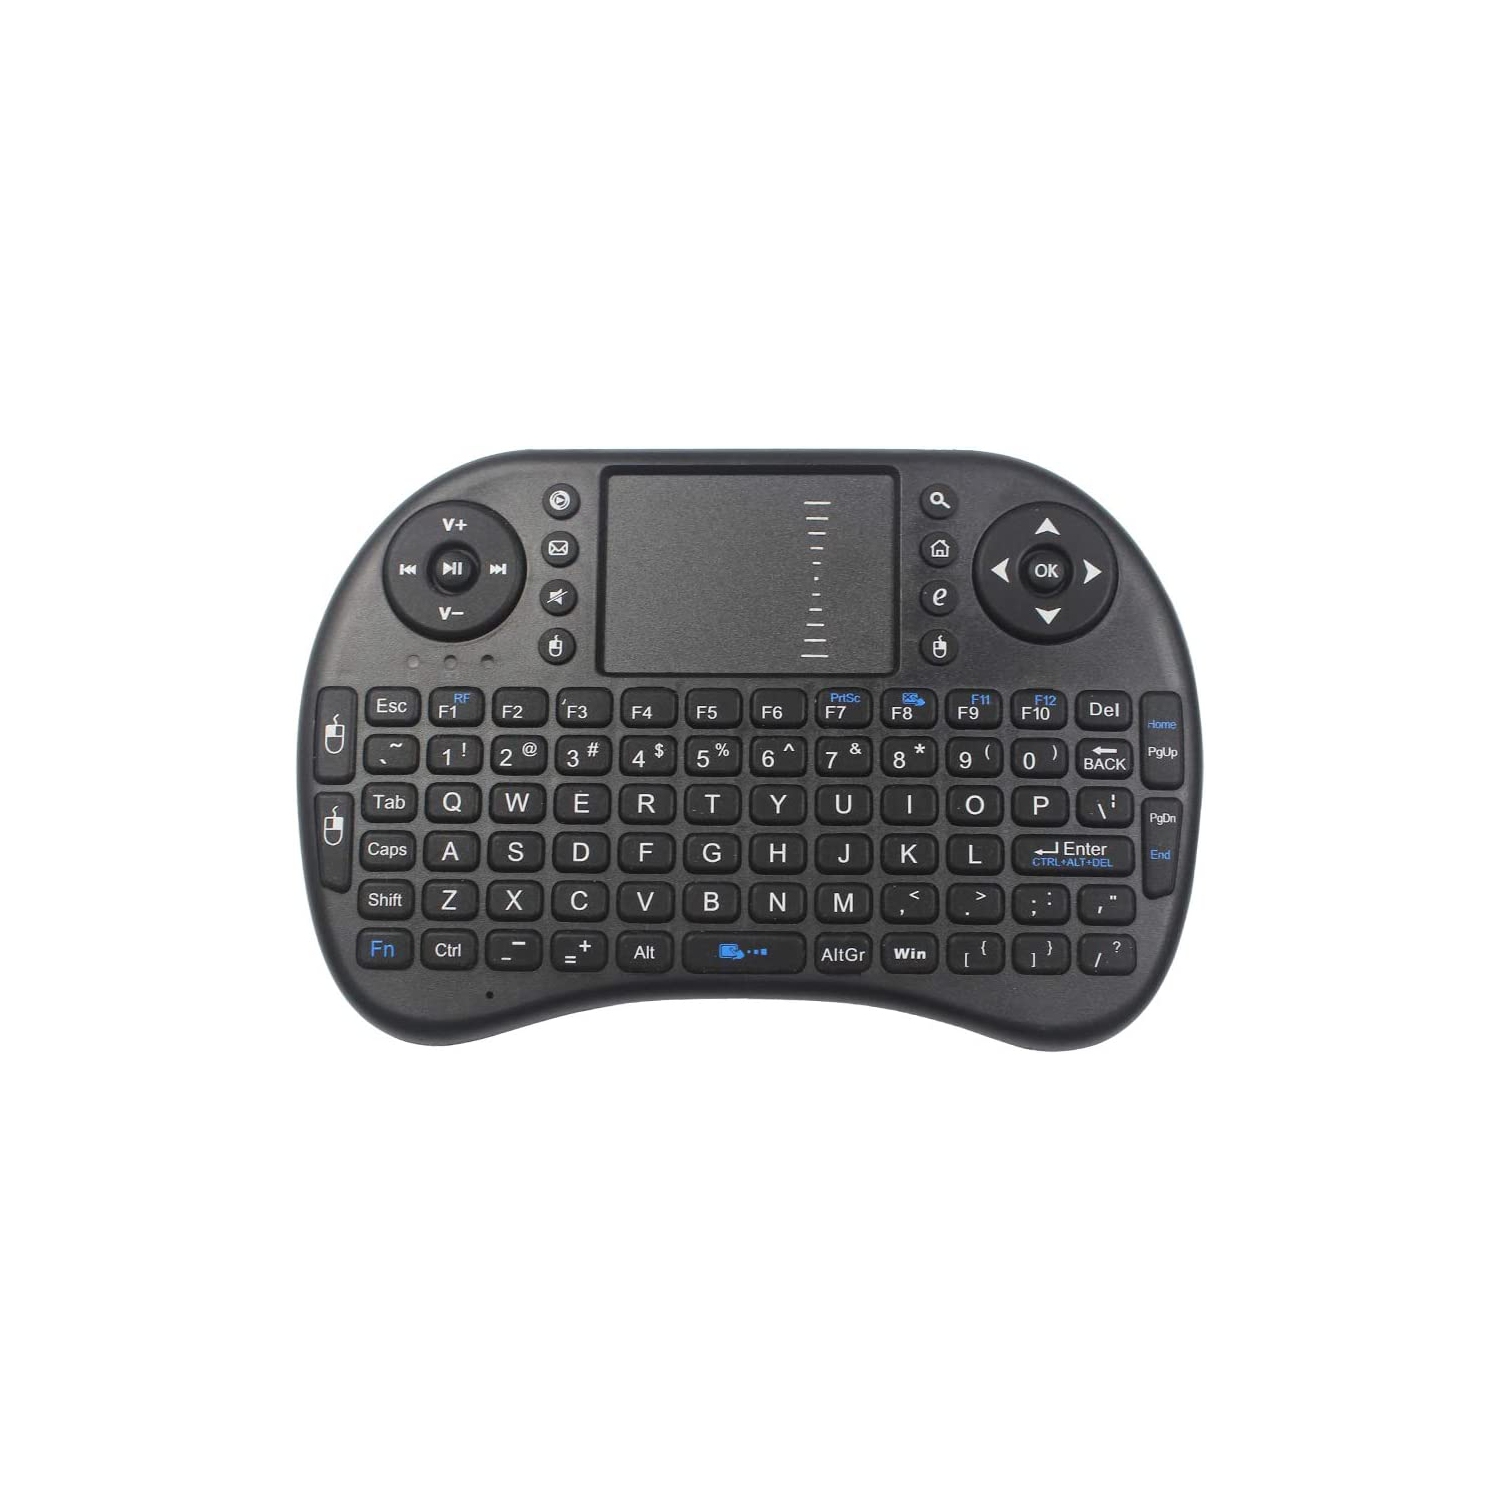 Mini Wireless Keyboard - 2.4GHz Controller with Touchpad Mouse Combo by , Compatible with Android TV Box, IPTV, HTPC, Smart TV, PC, X-Box,etc.